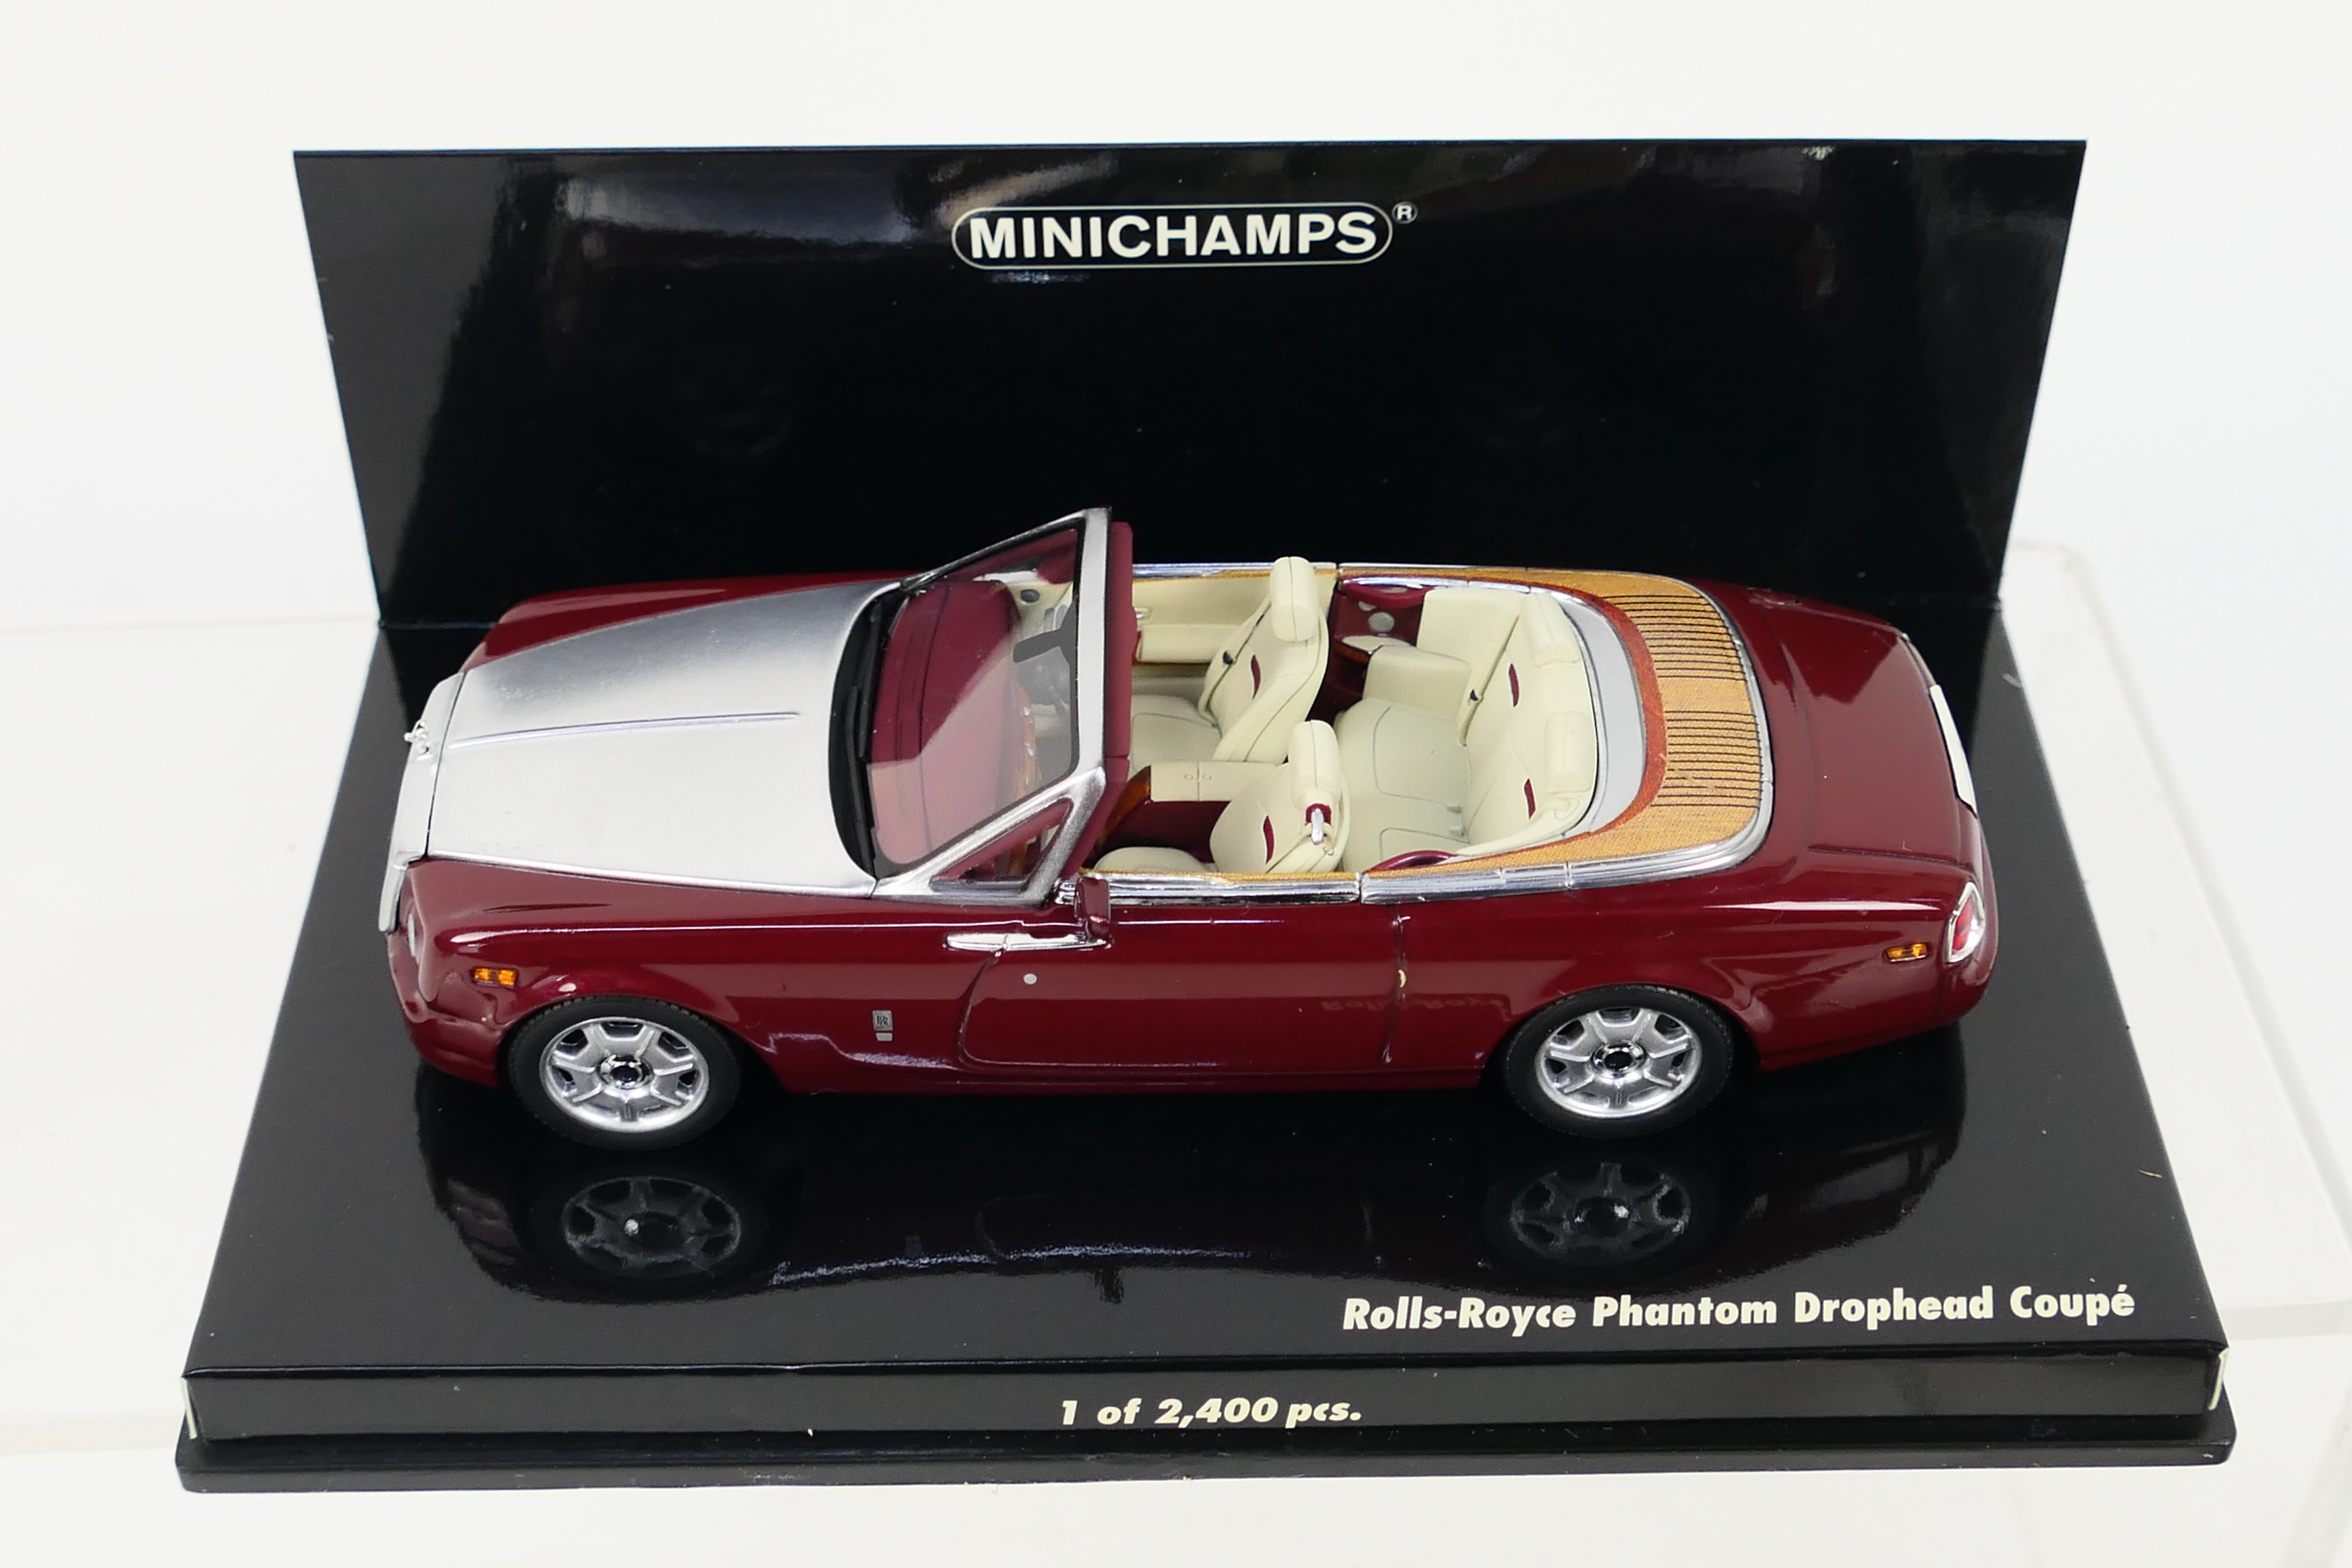 Minichamps - 2 x boxed 1:43 scale Rolls-Royce die-cast model vehicles - Lot includes a #436 134731 - Image 3 of 3